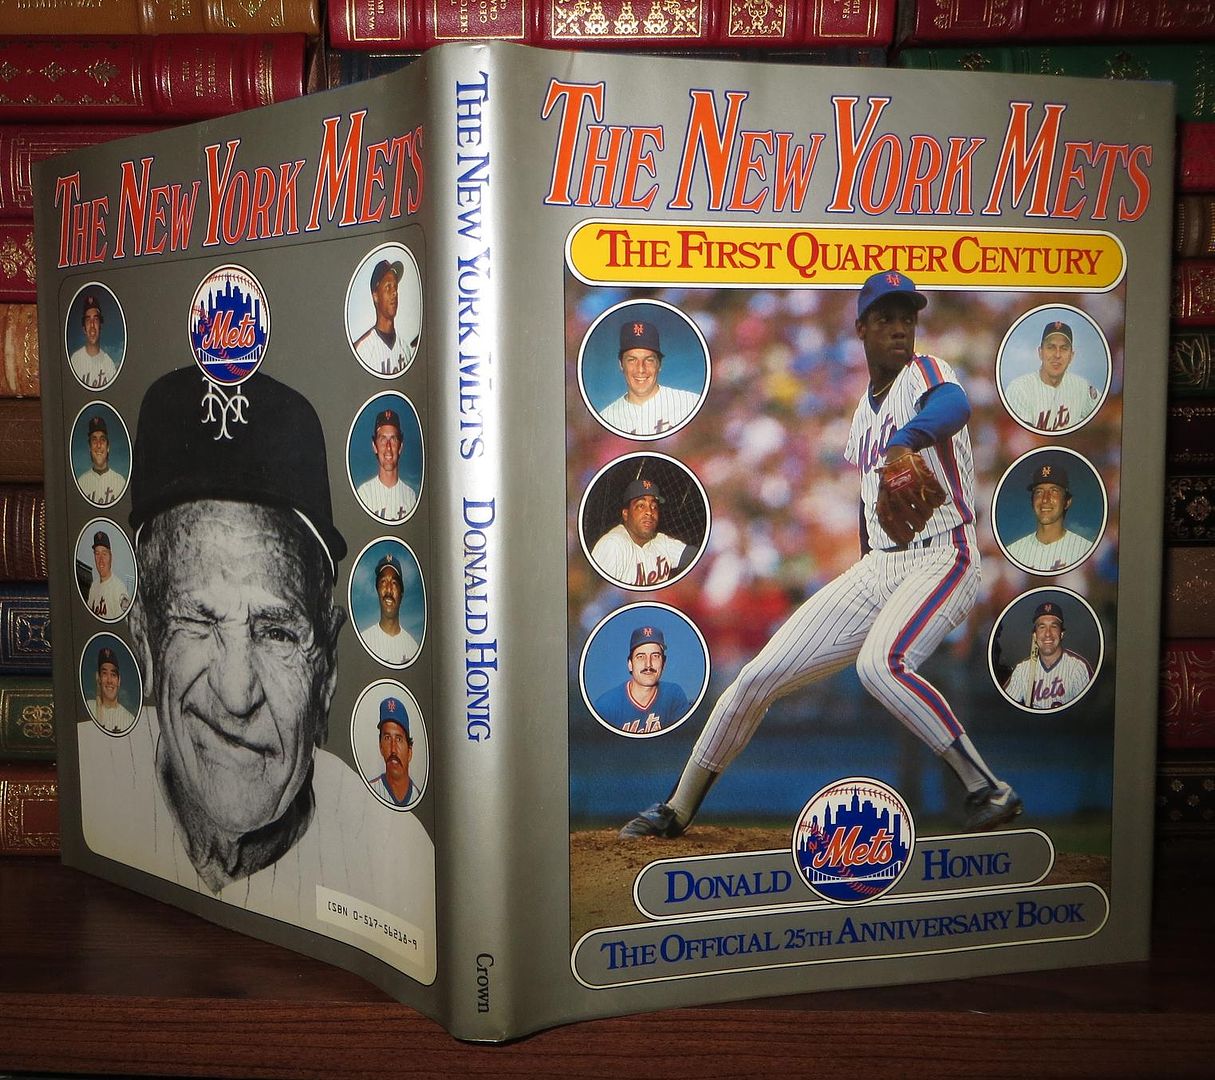 HONIG, DONALD - The New York Mets the First Quarter Century: The Official 25th Anniversary Book